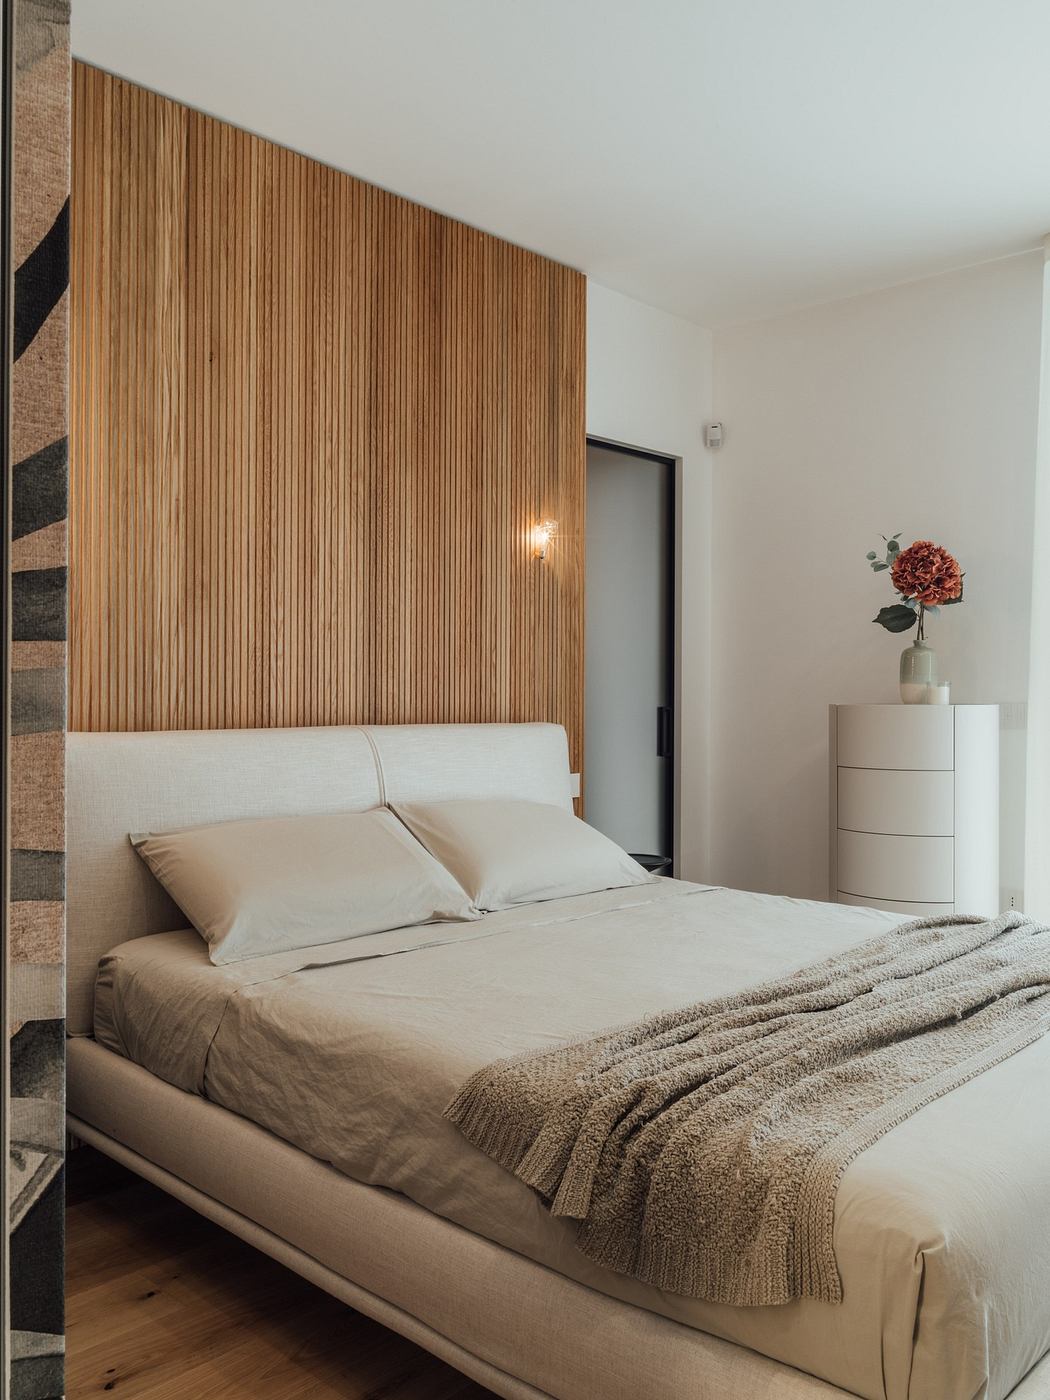 Modern bedroom with wooden headboard and neutral bedding.